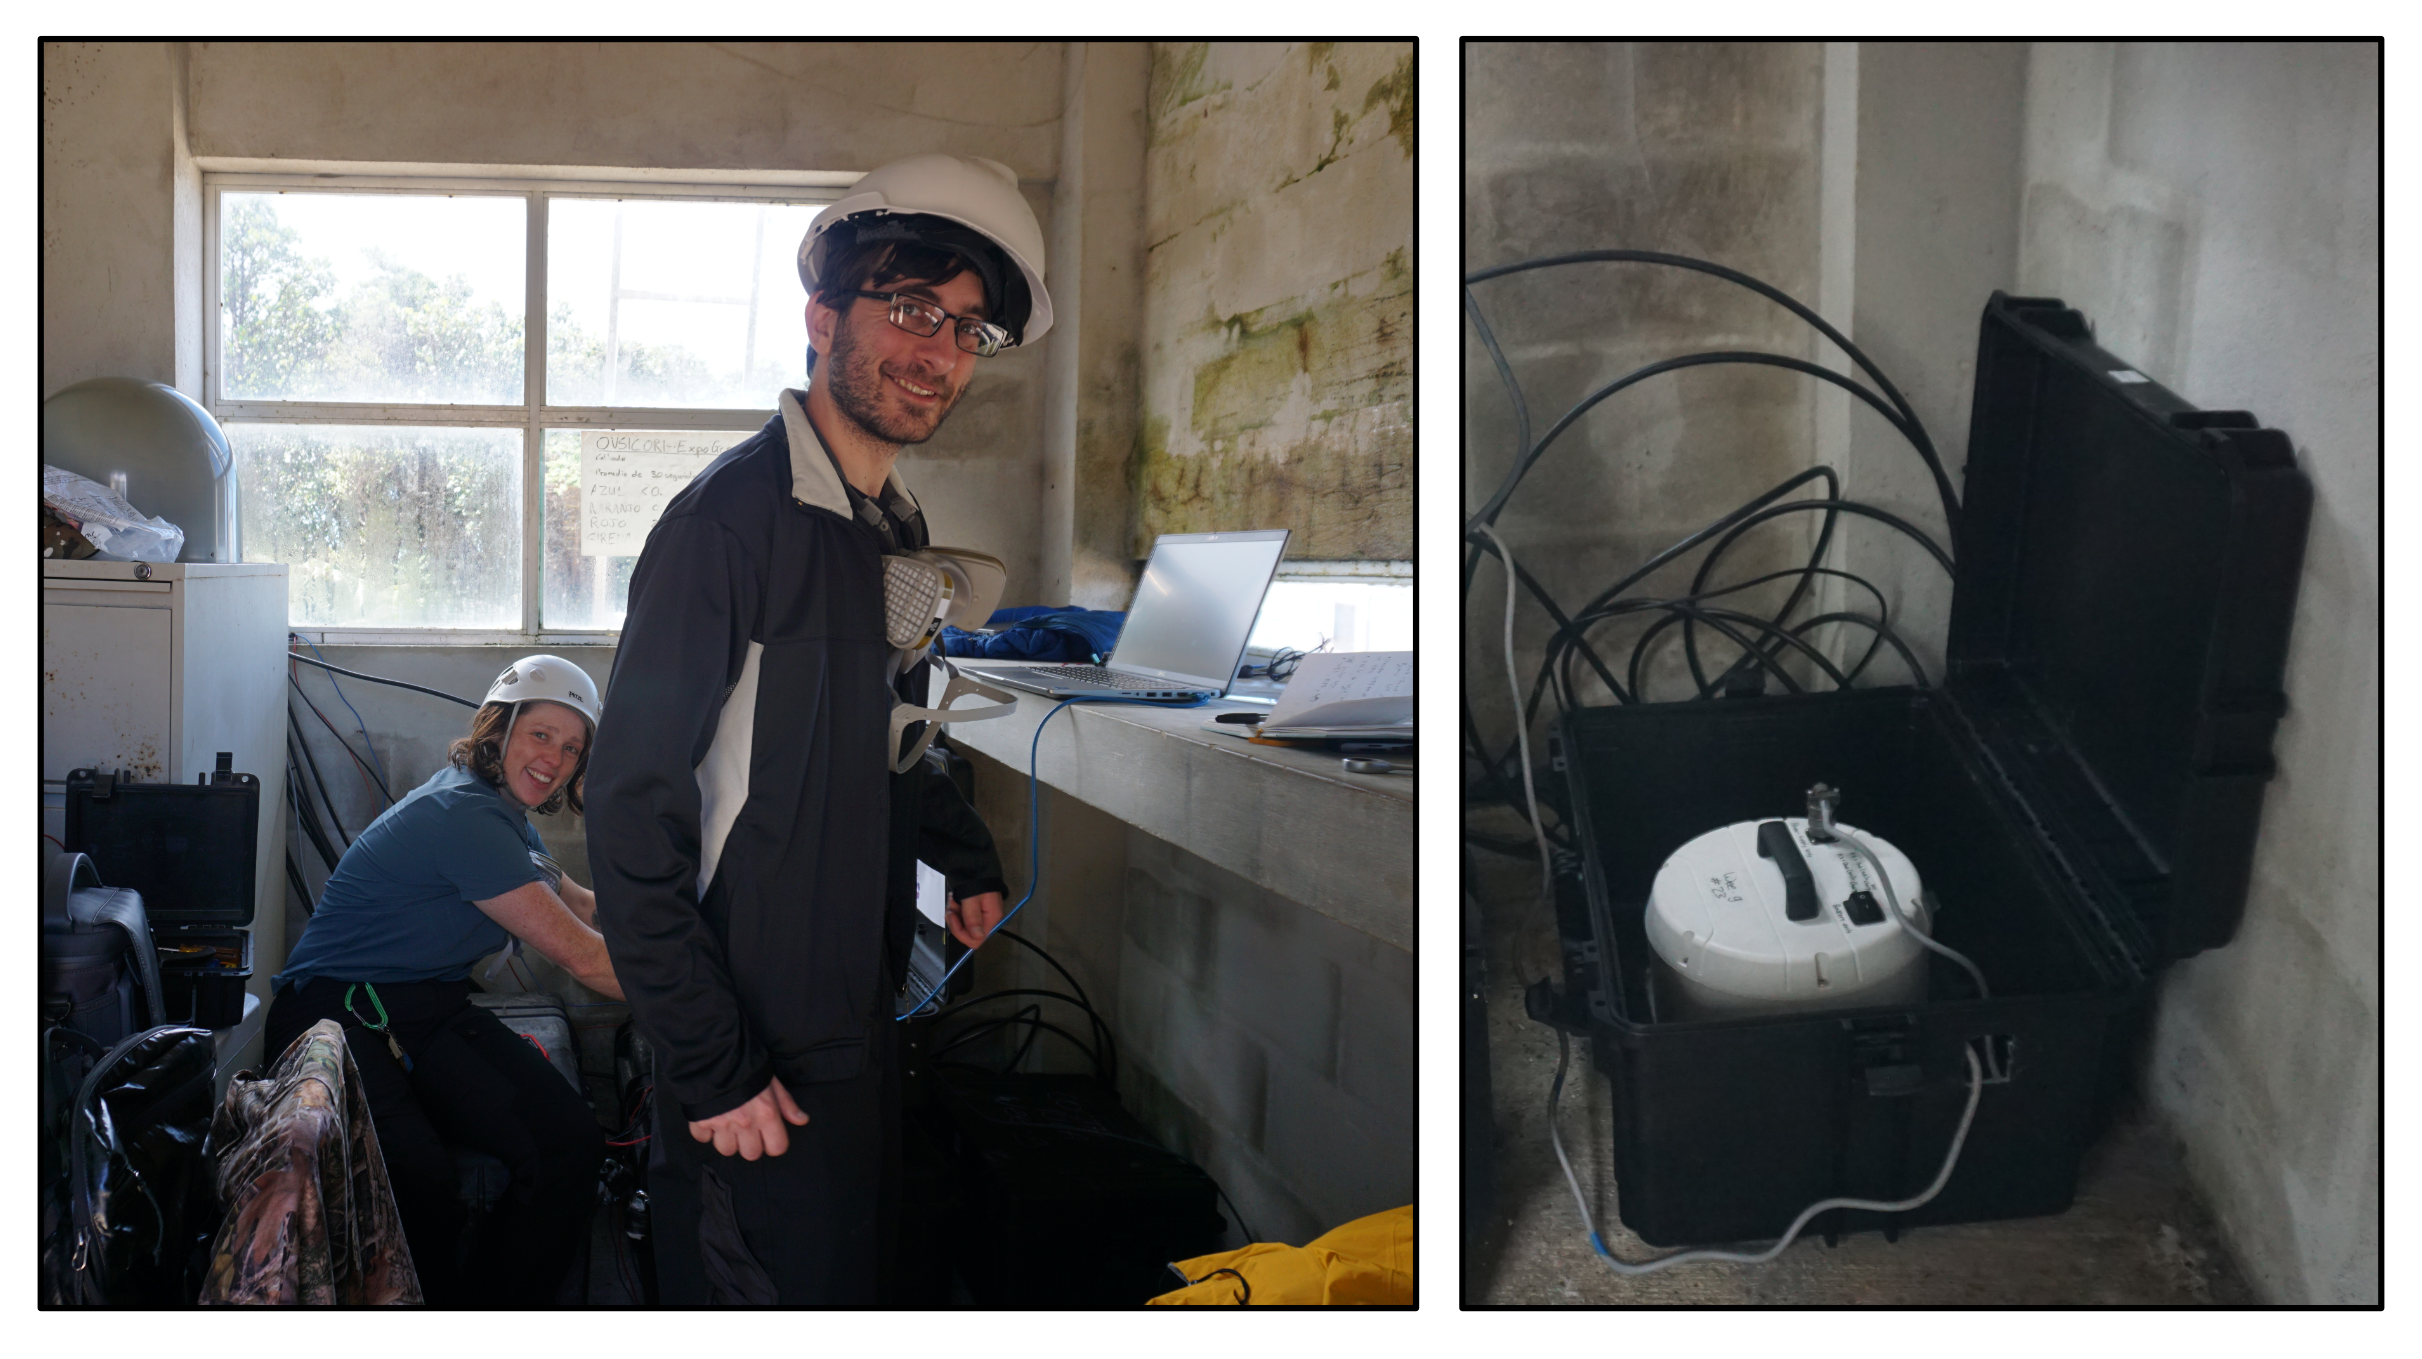 Team Wee-g. Left: Libby Passey and Kris Anastasiou working in the Mirador hut, installing the Wee-g gravimeter next to the AVERT control box. Right: The Wee-g itself, deployed inside a protective case that is bolted into the concrete to protect the sensitive instrument from bumps and knocks.